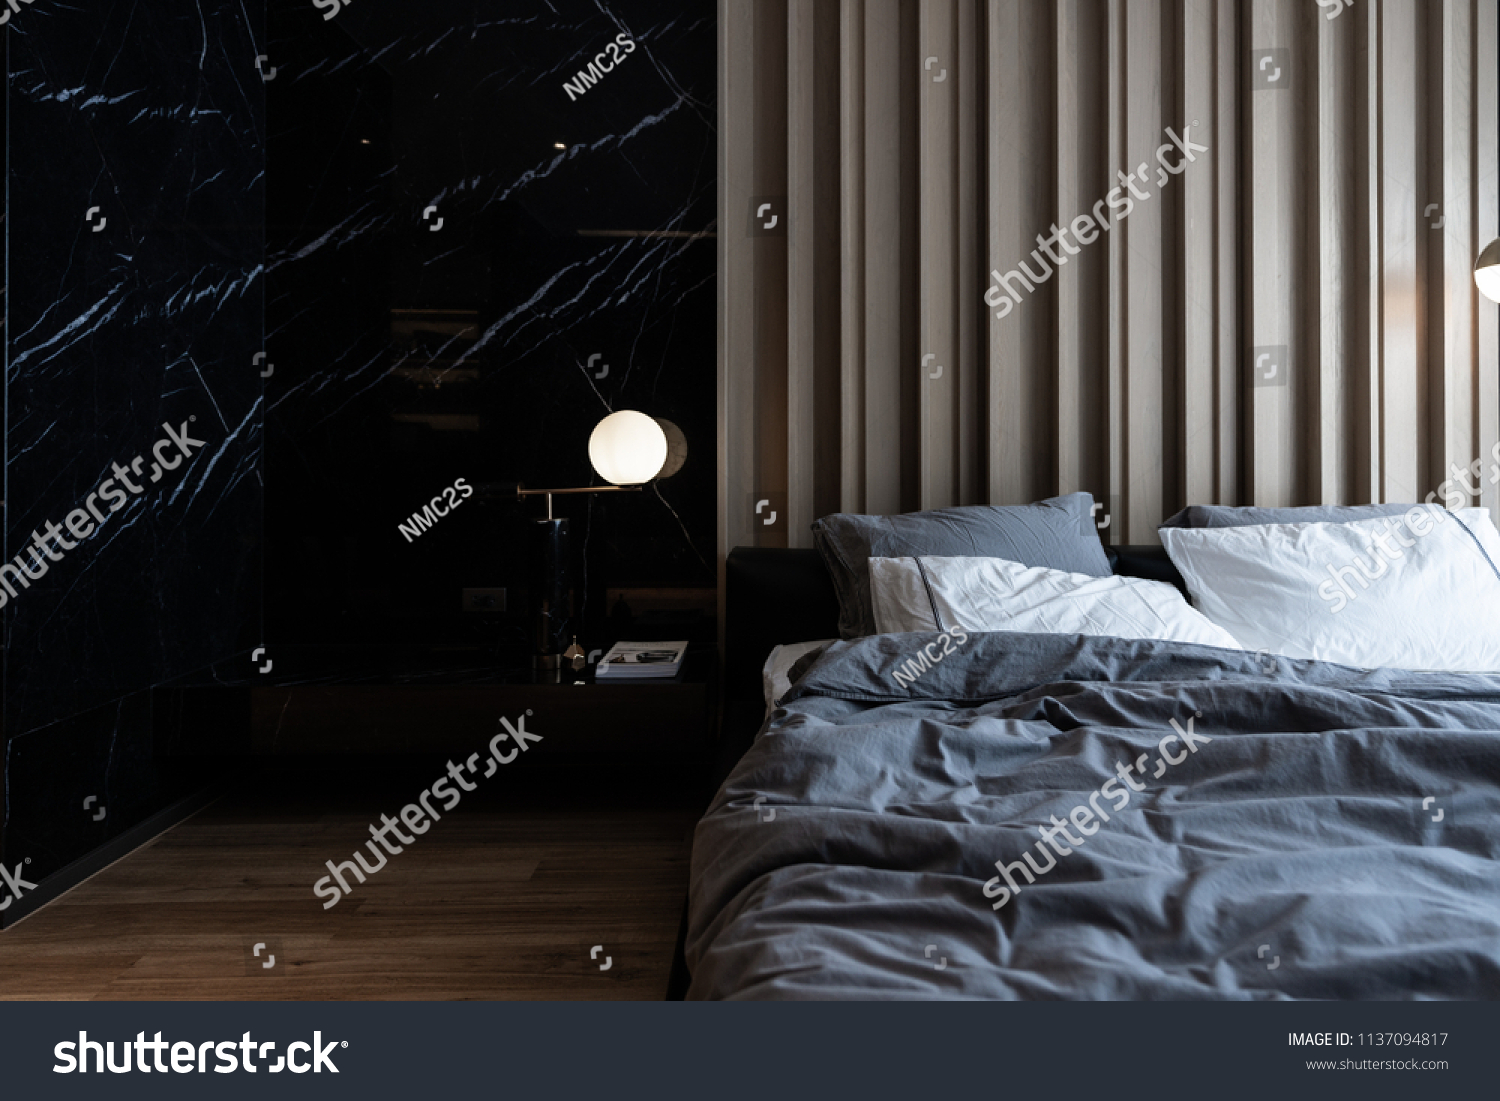 Cozy bedroom corner with nice black marble table lamp in mid century style in front of  wooden strip composition  headboard and natural black marble on the wall #1137094817